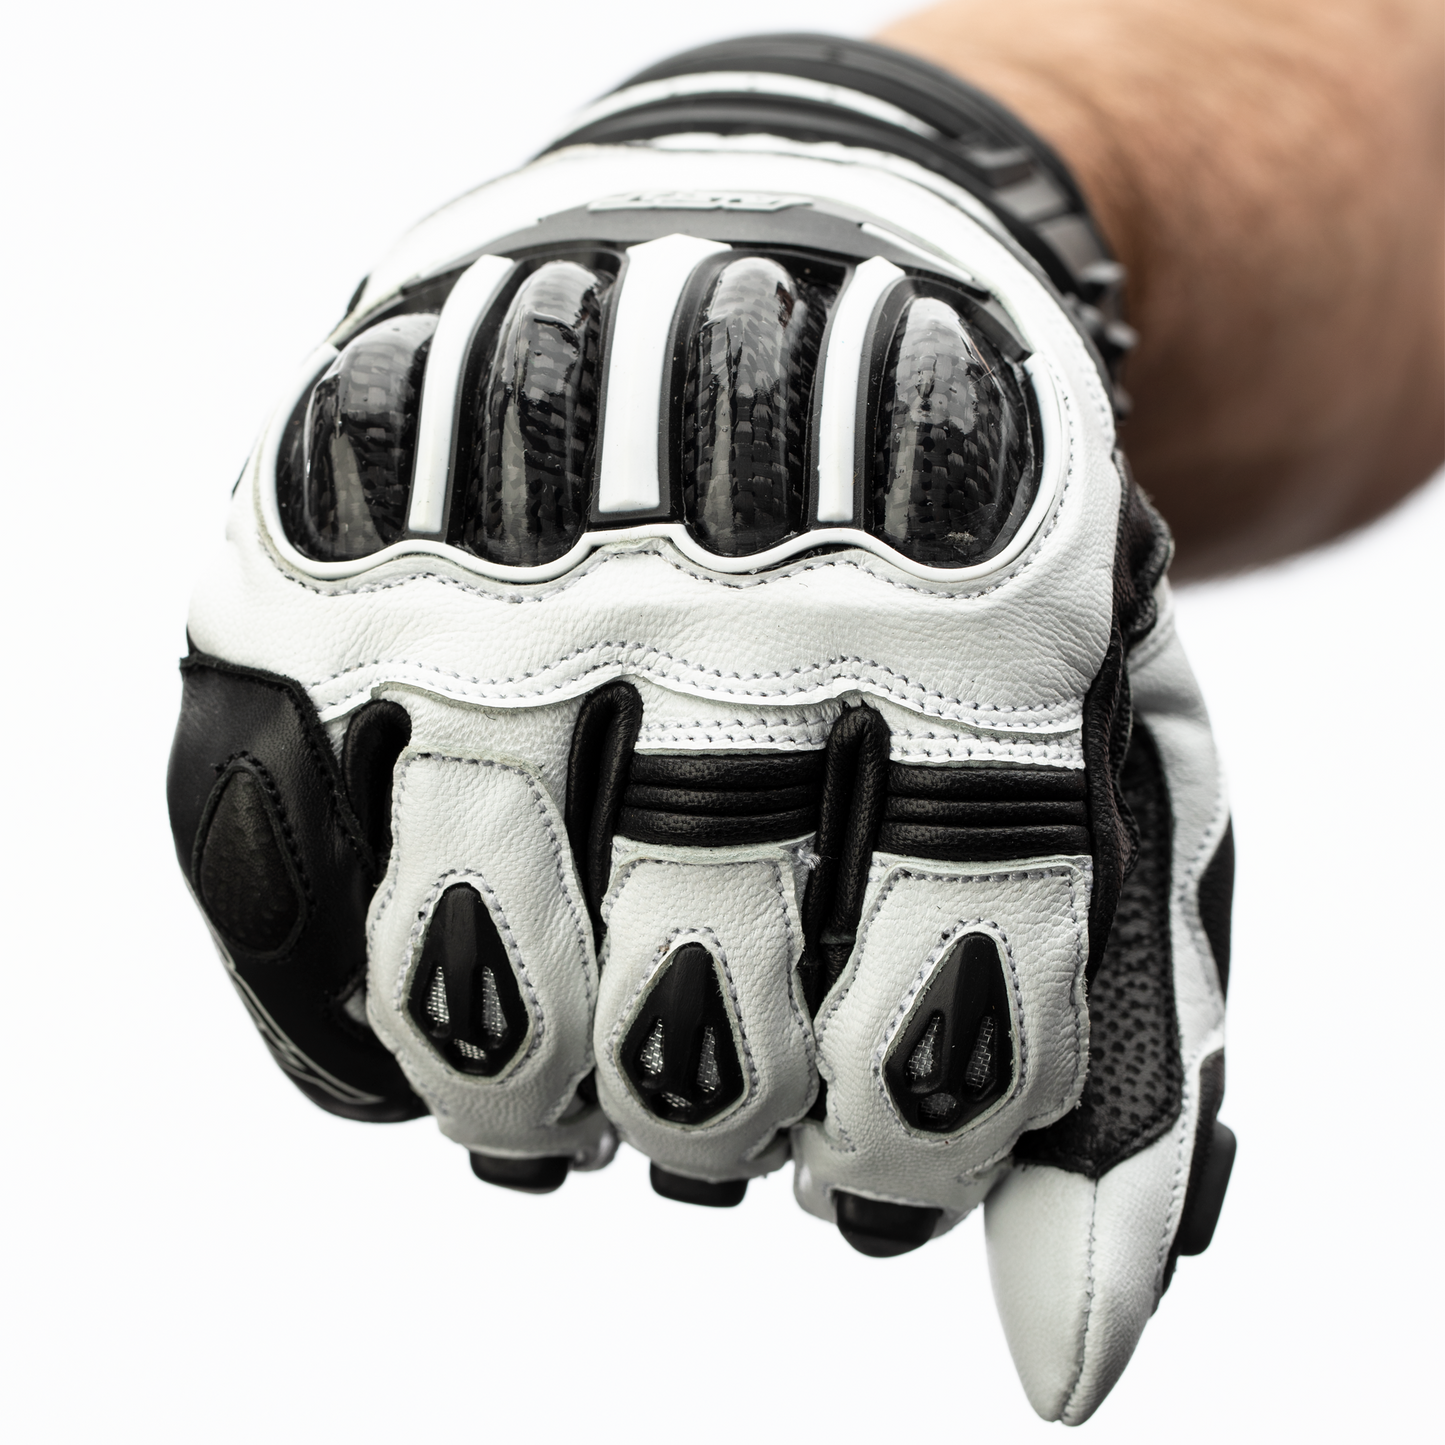 RST TracTech Evo Leather Racing/Riding Short Gloves - CE Approved - White